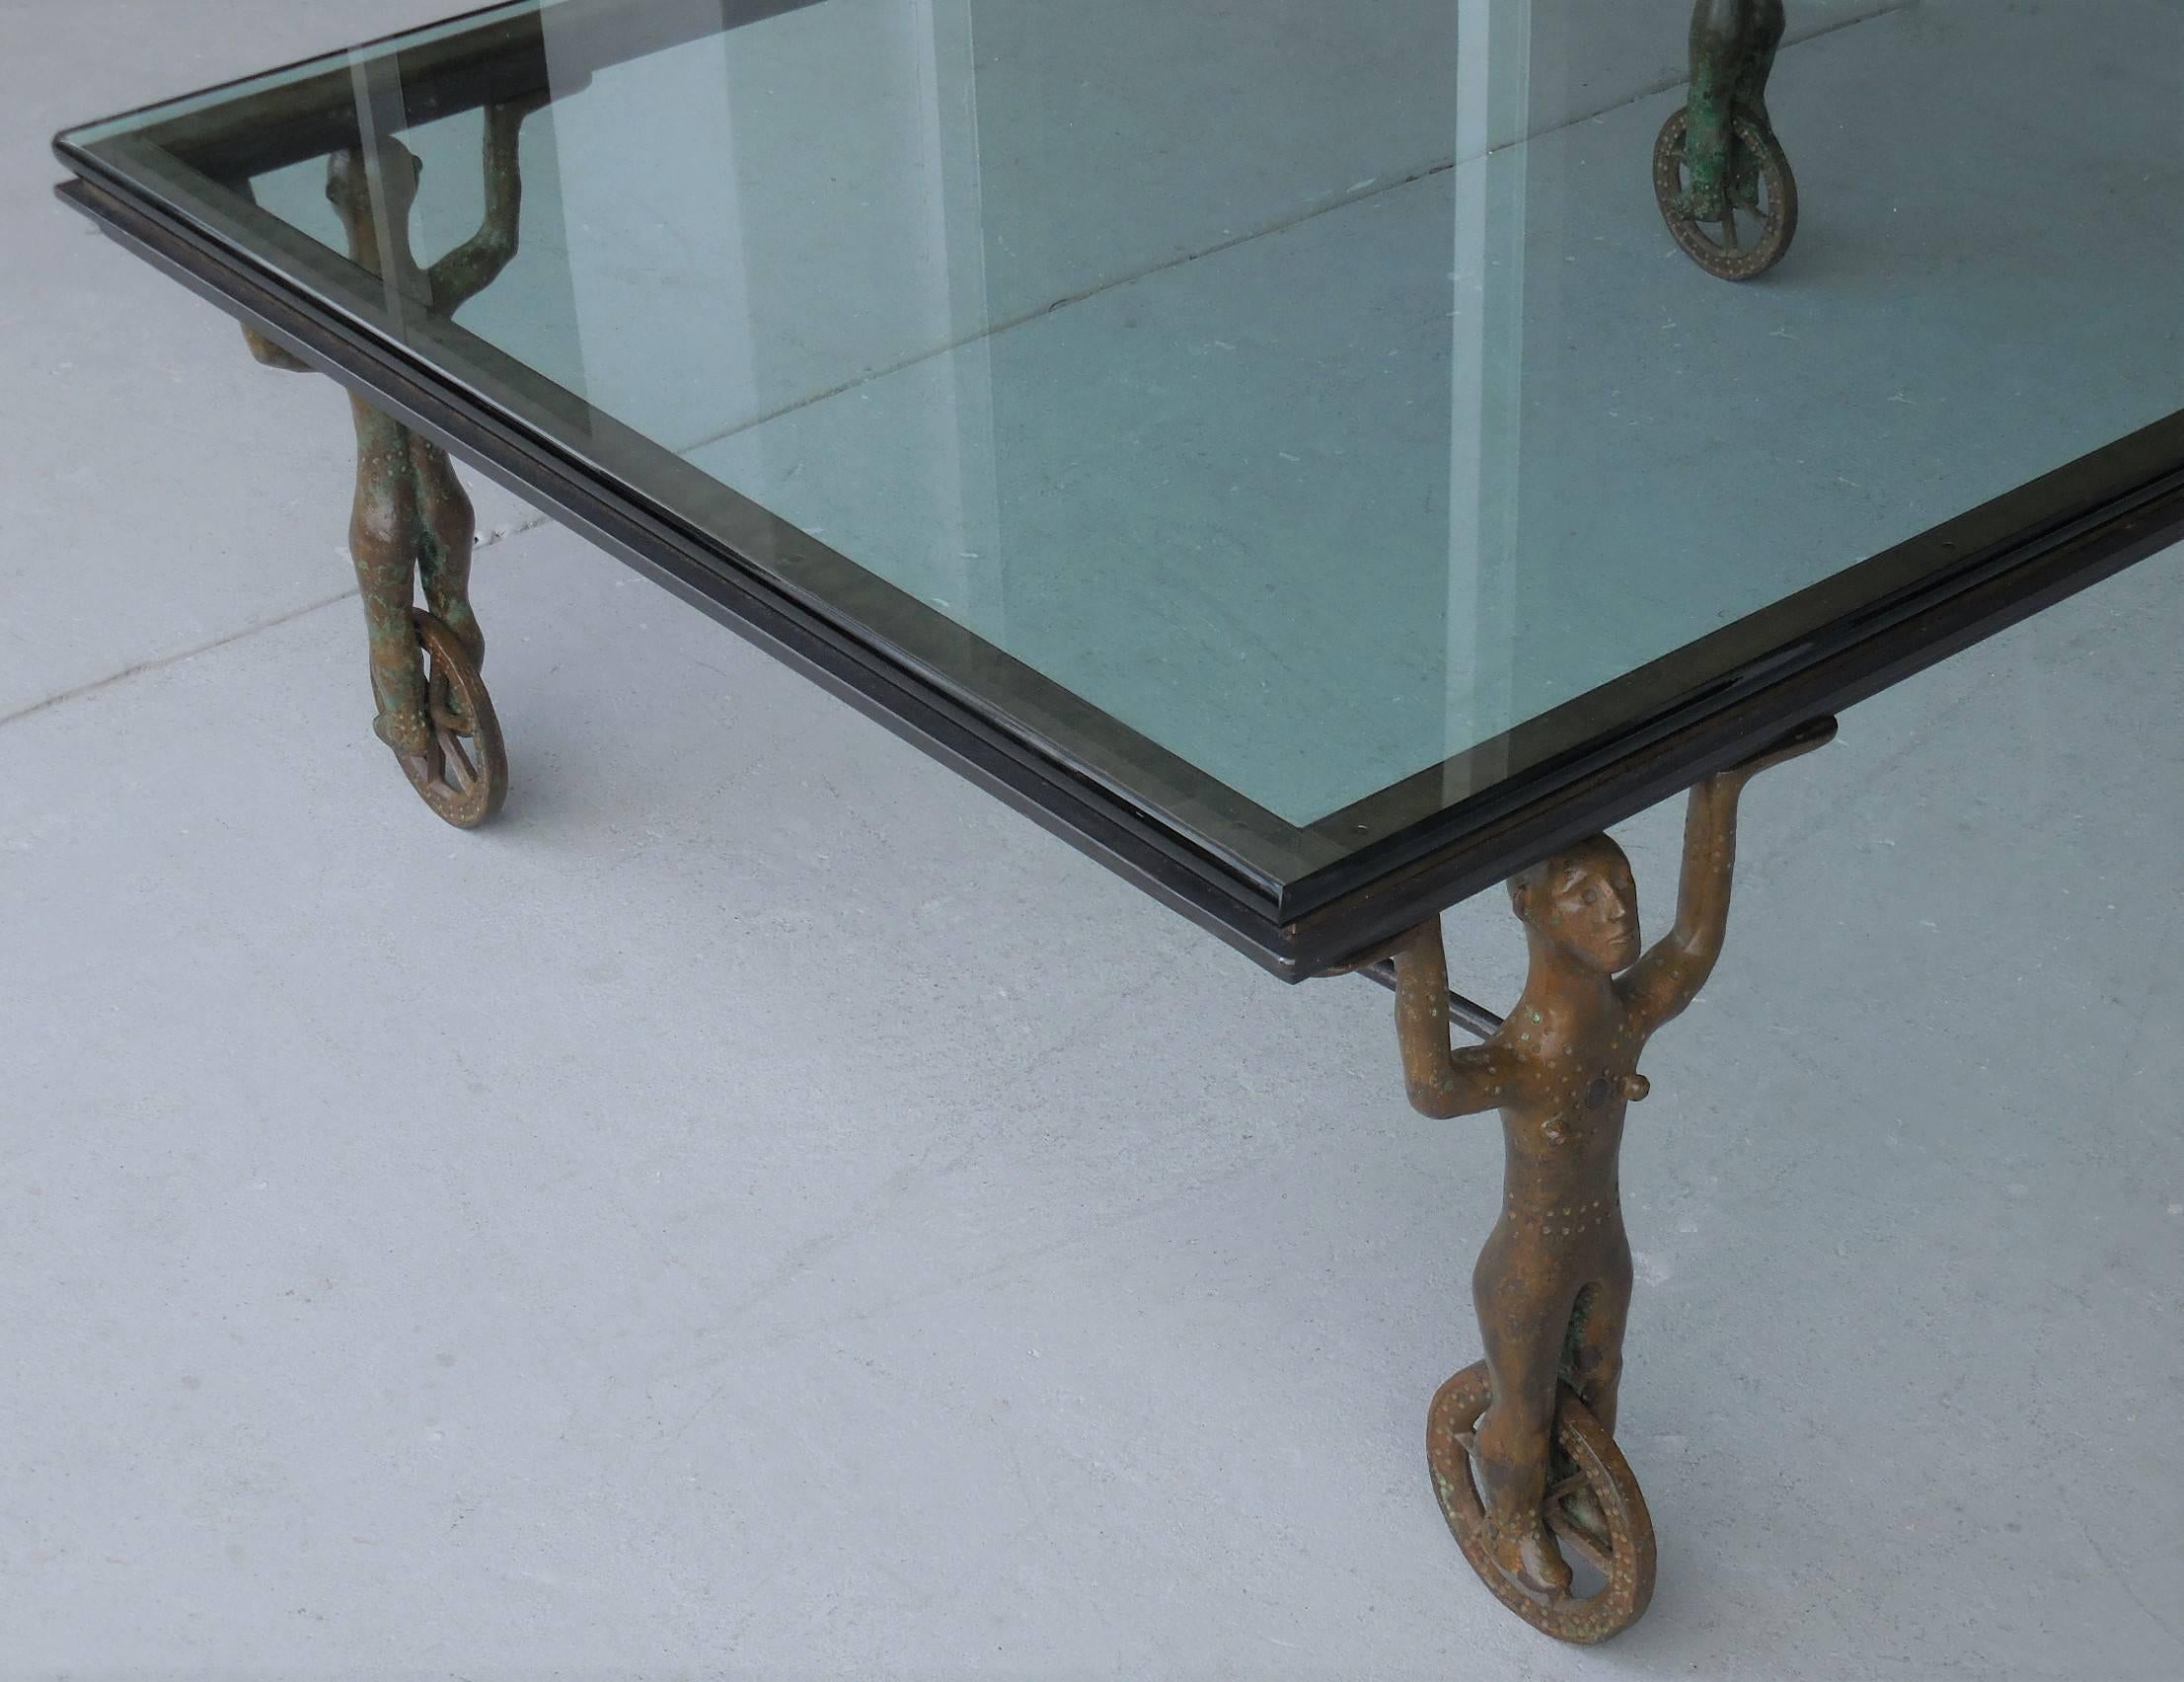 Most interesting coffee table. Bronze figures on wheels. Signed, numbered and dated on underside of frame. The four bronze caryatid elements have a unique flair to them, reminiscent of work by the Giacometti brothers.  Glass top is 3/4